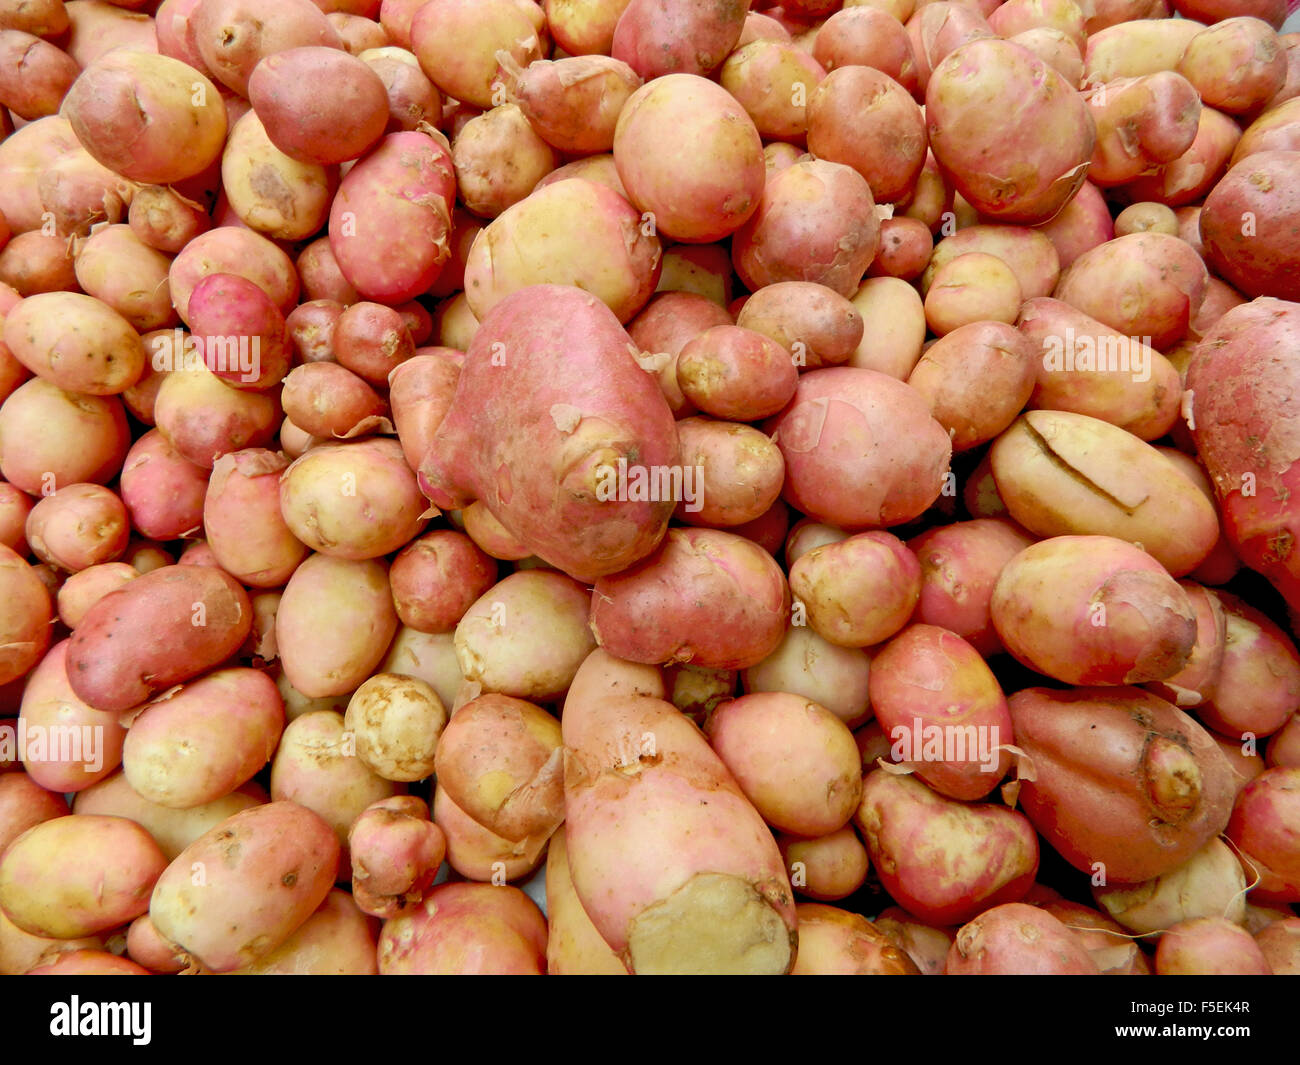 Young and fresh potatoes put forward to the market for sale. Stock Photo